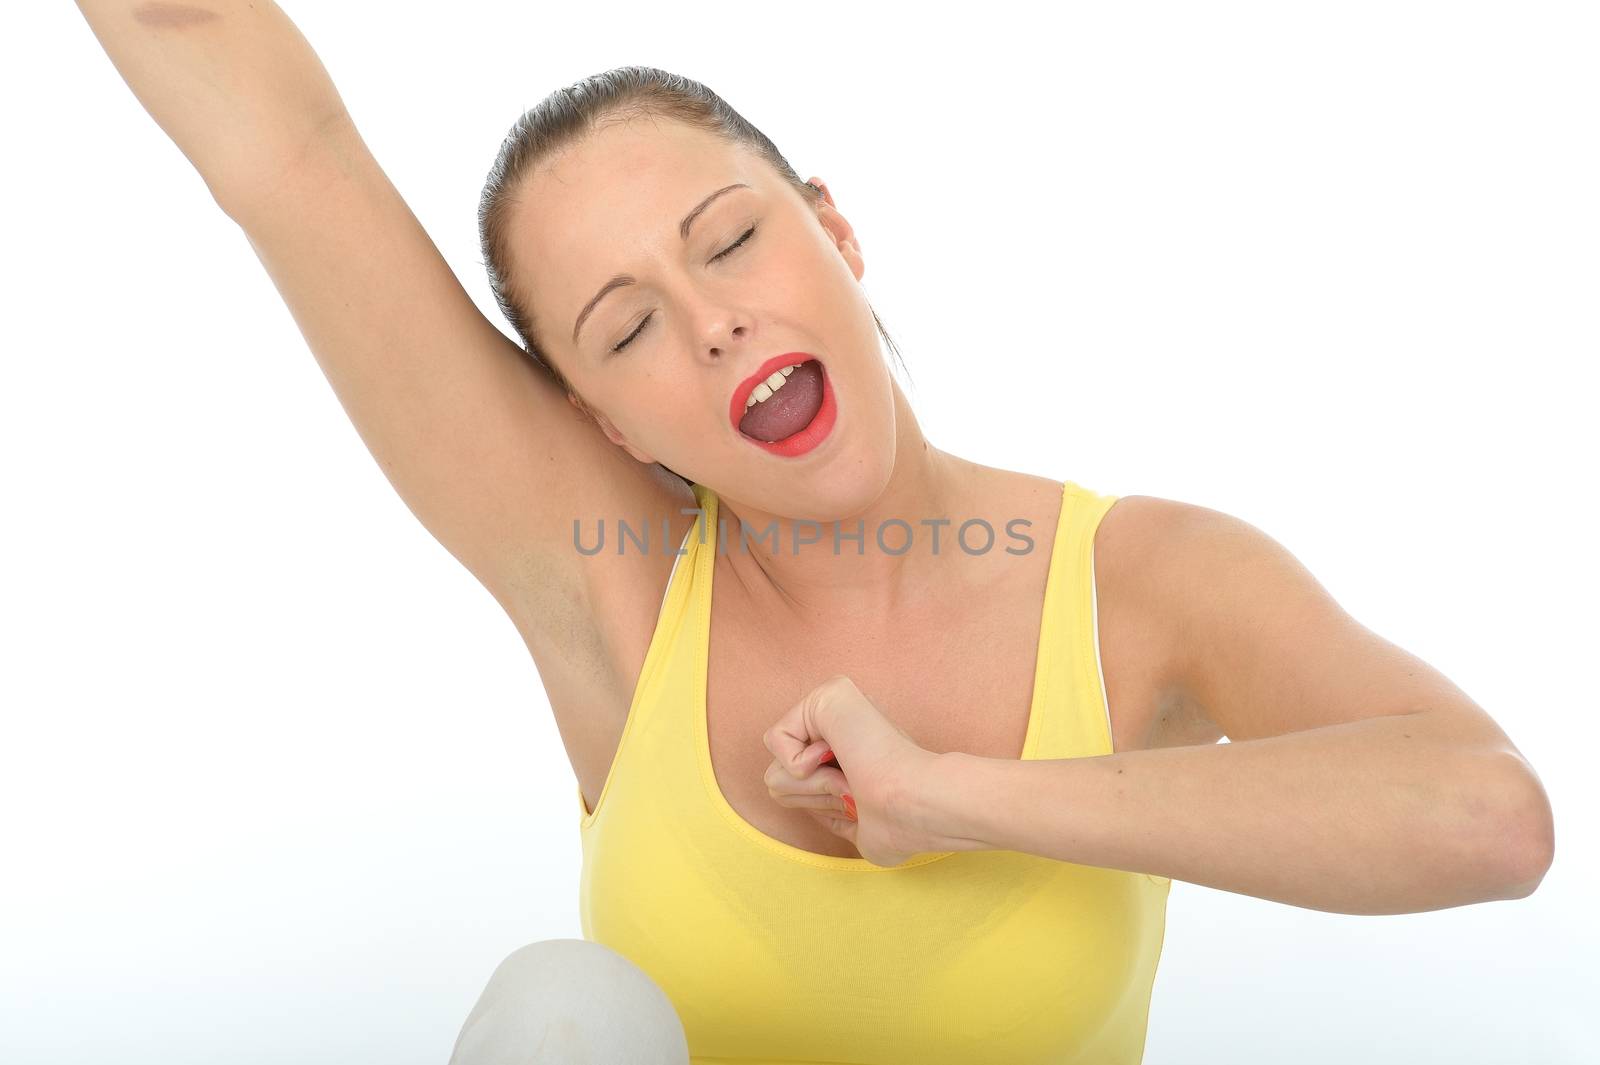 Attractive Young Woman Stretching and Yawning Wearing a Bright Yellow Vest Top